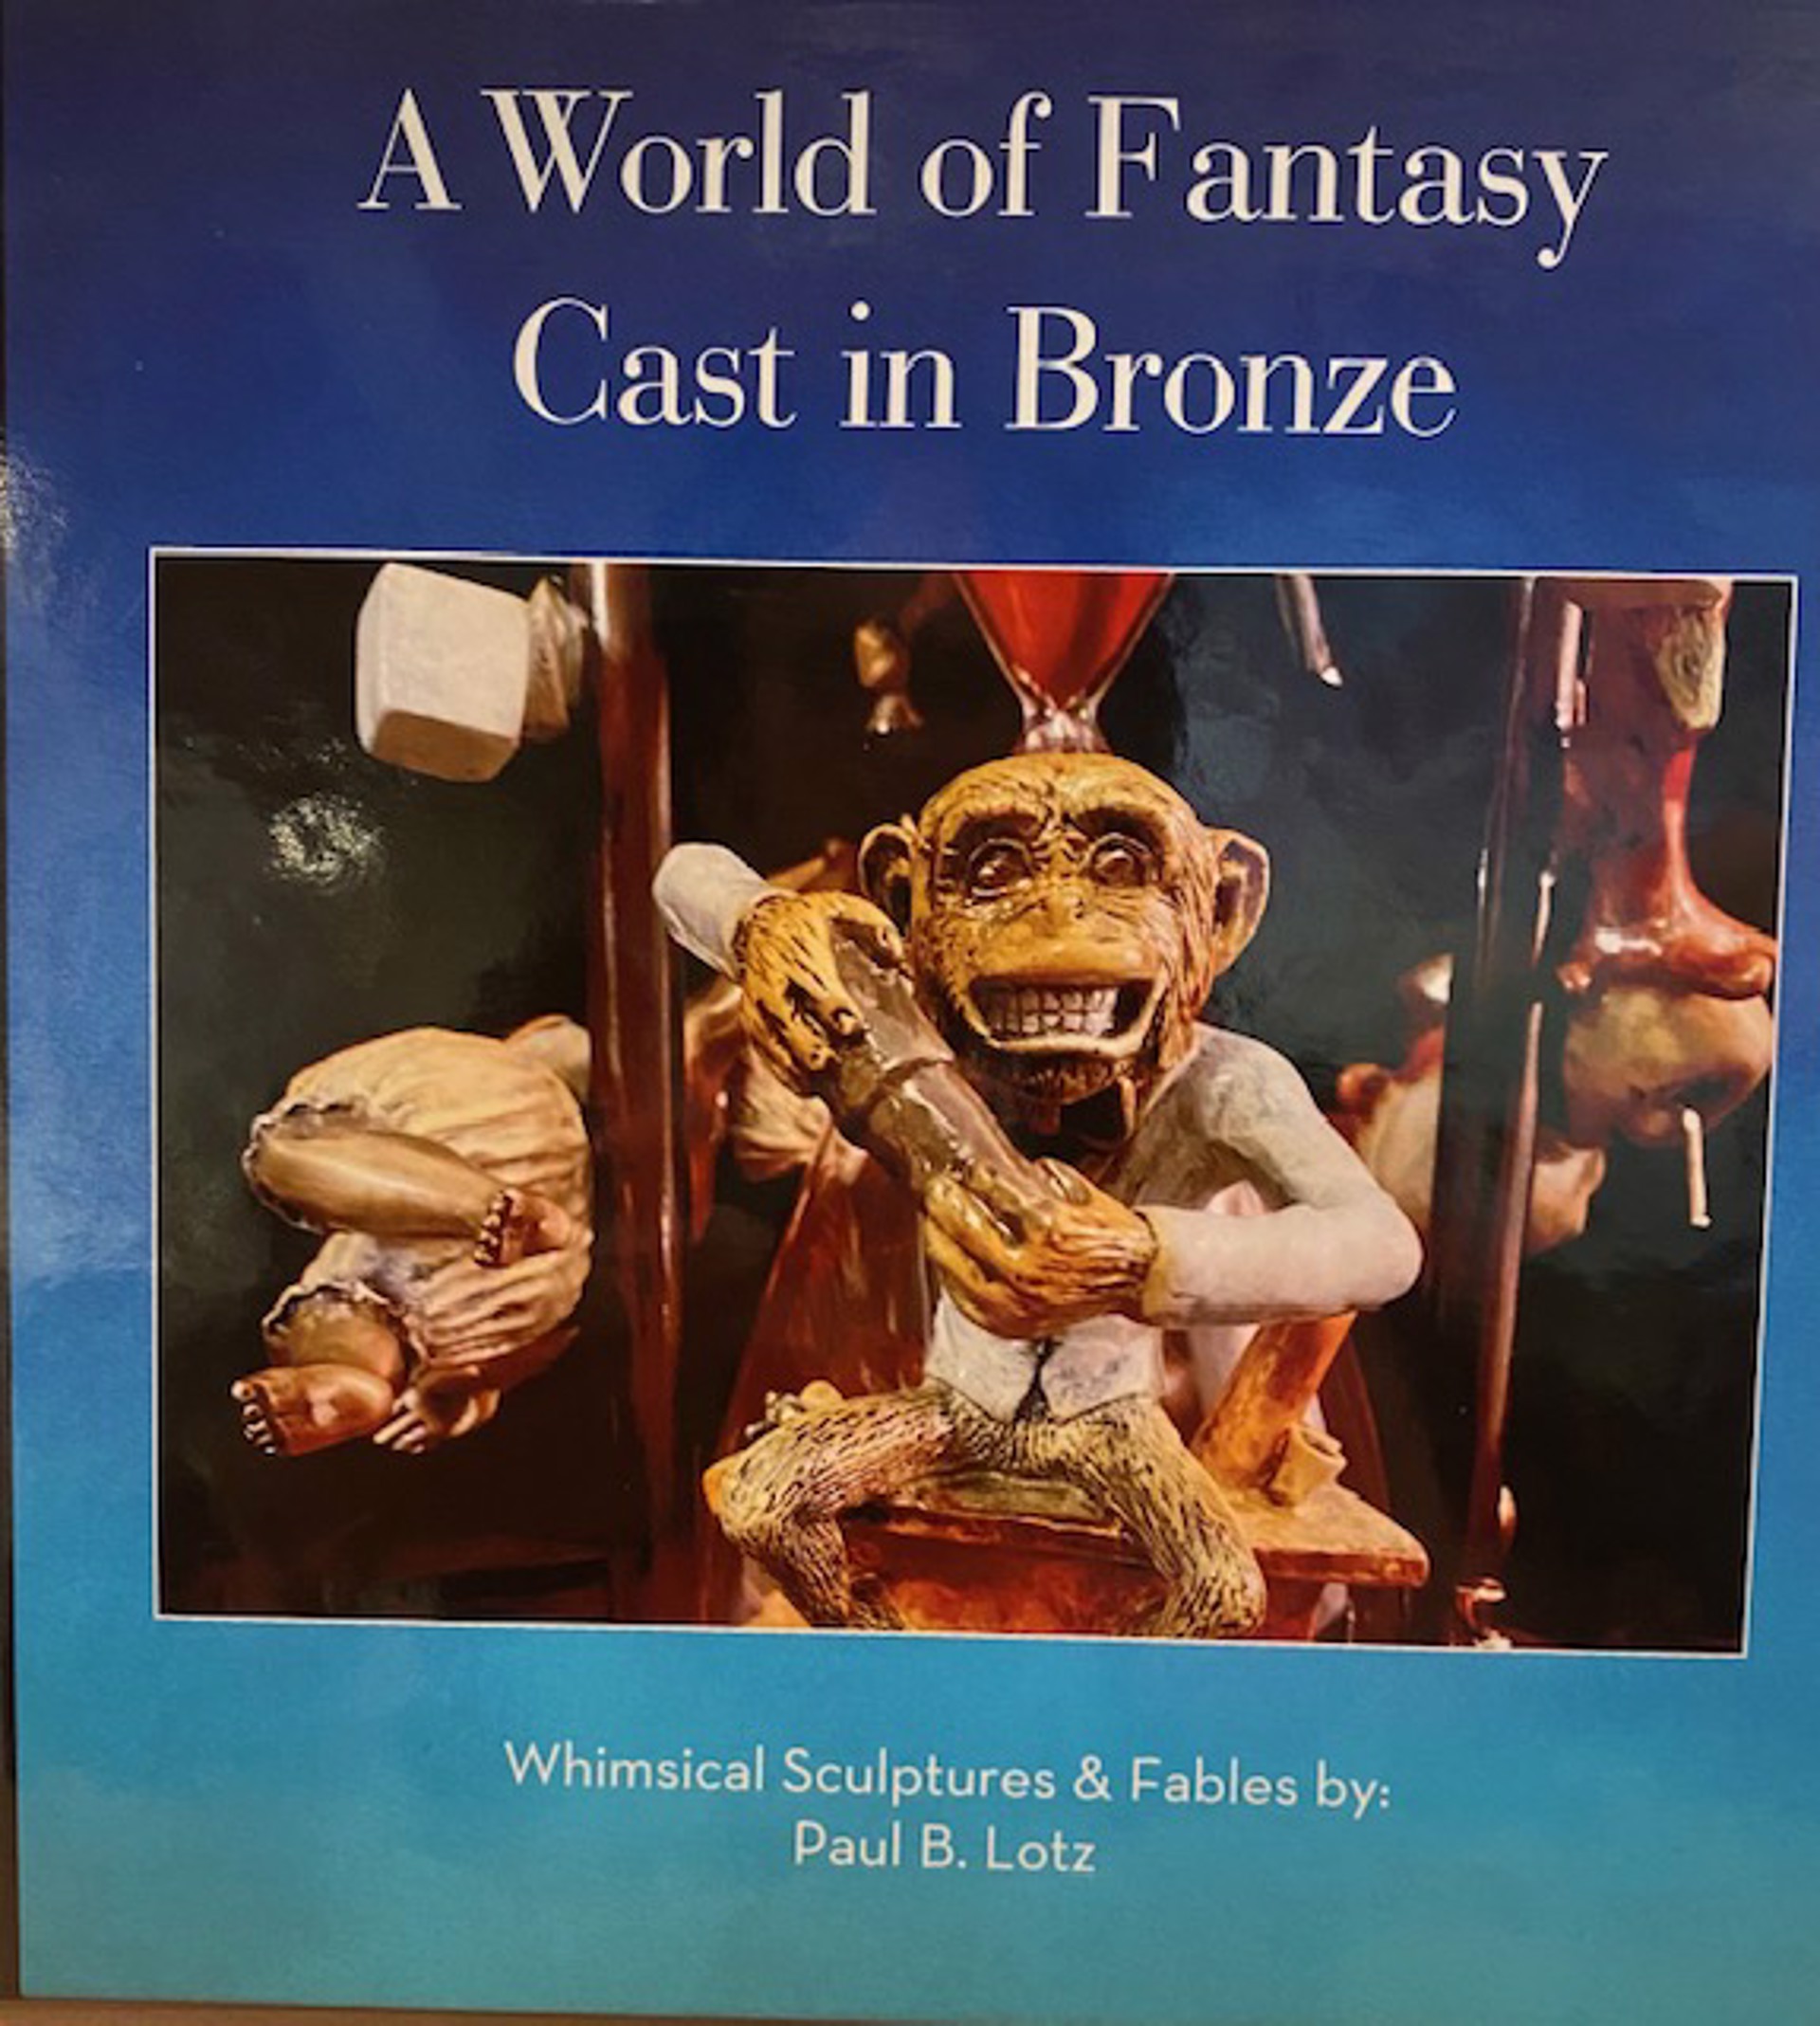 A World of Fantasy Cast in Bronze by Paul Lotz